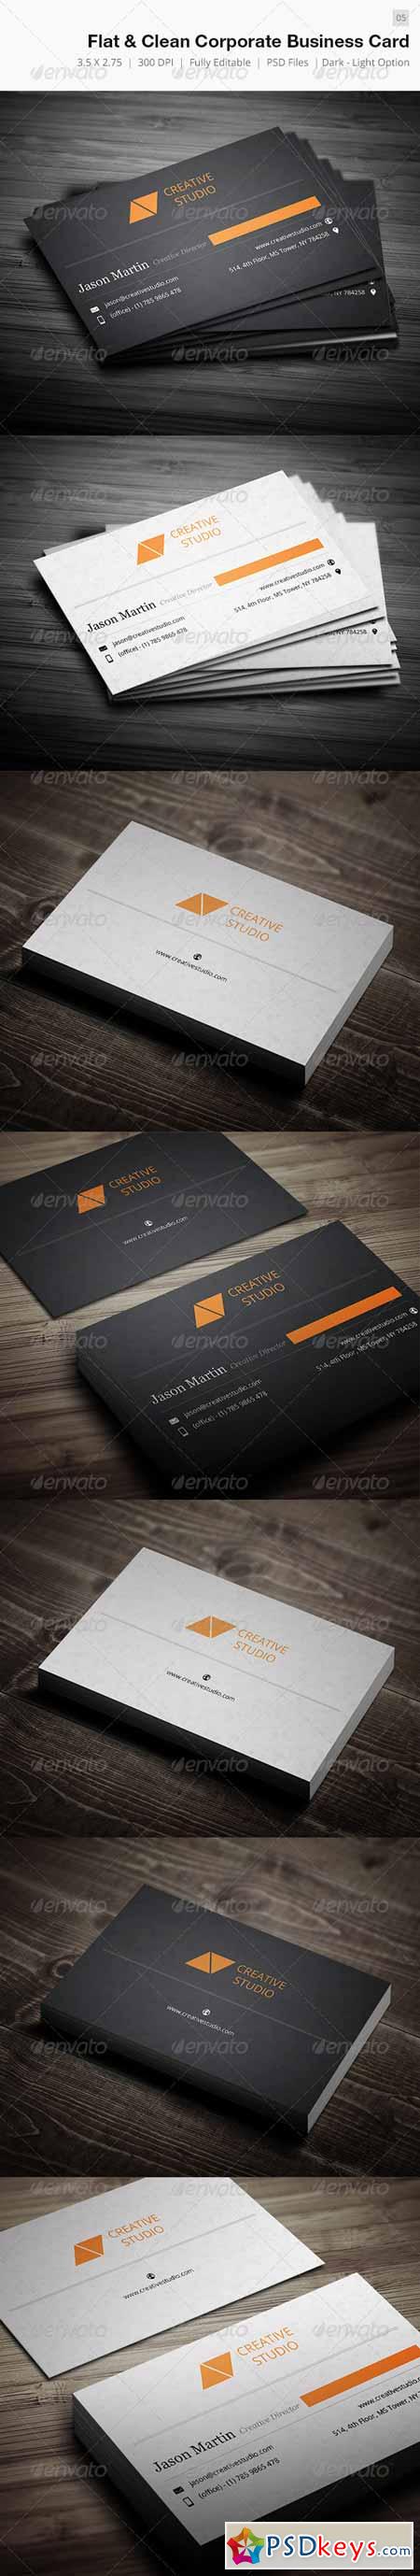 Dual Clean Corporate Business Card - 05 5563266